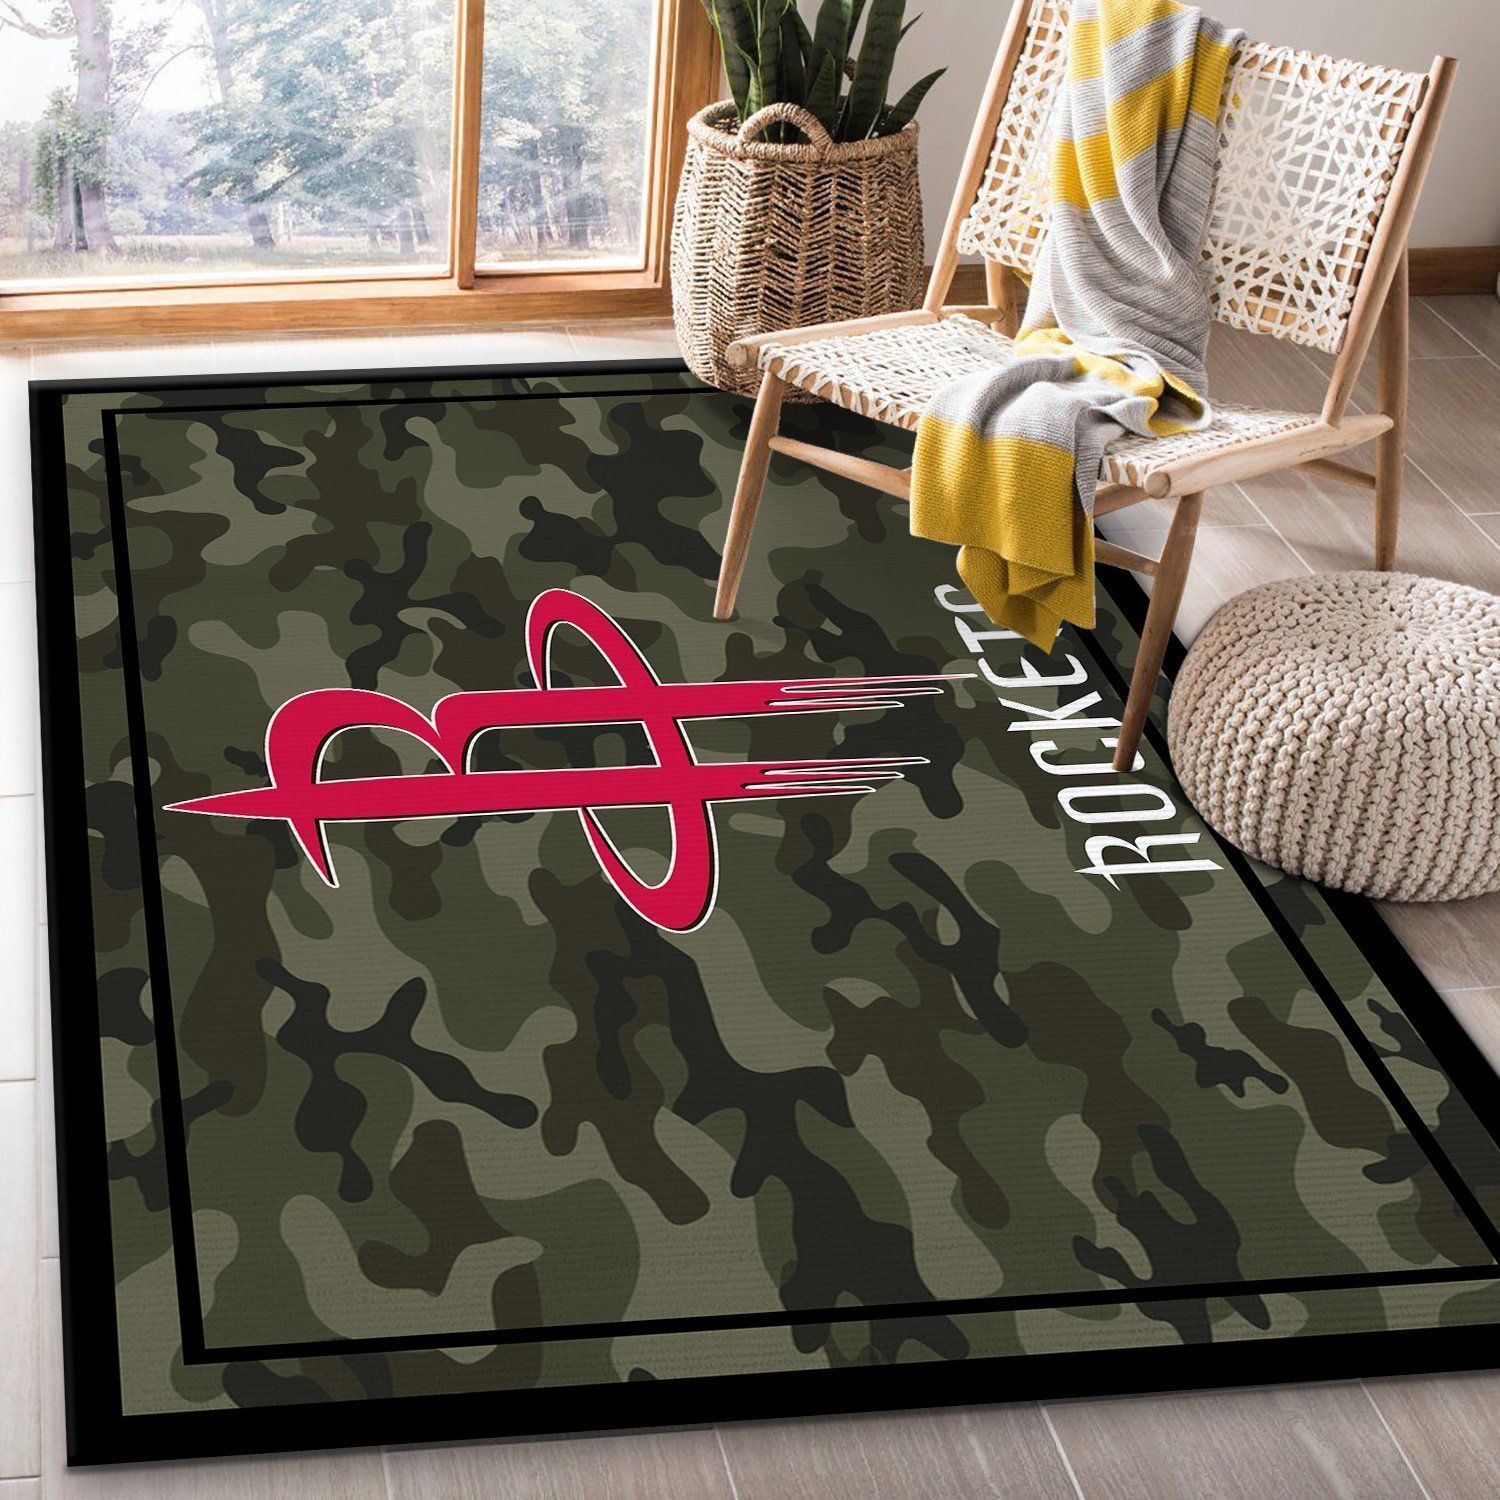 Houston Rockets Nba Team Logo Camo Style Nice Gift Home Decor Area Rug Rugs For Living Room - Indoor Outdoor Rugs 2